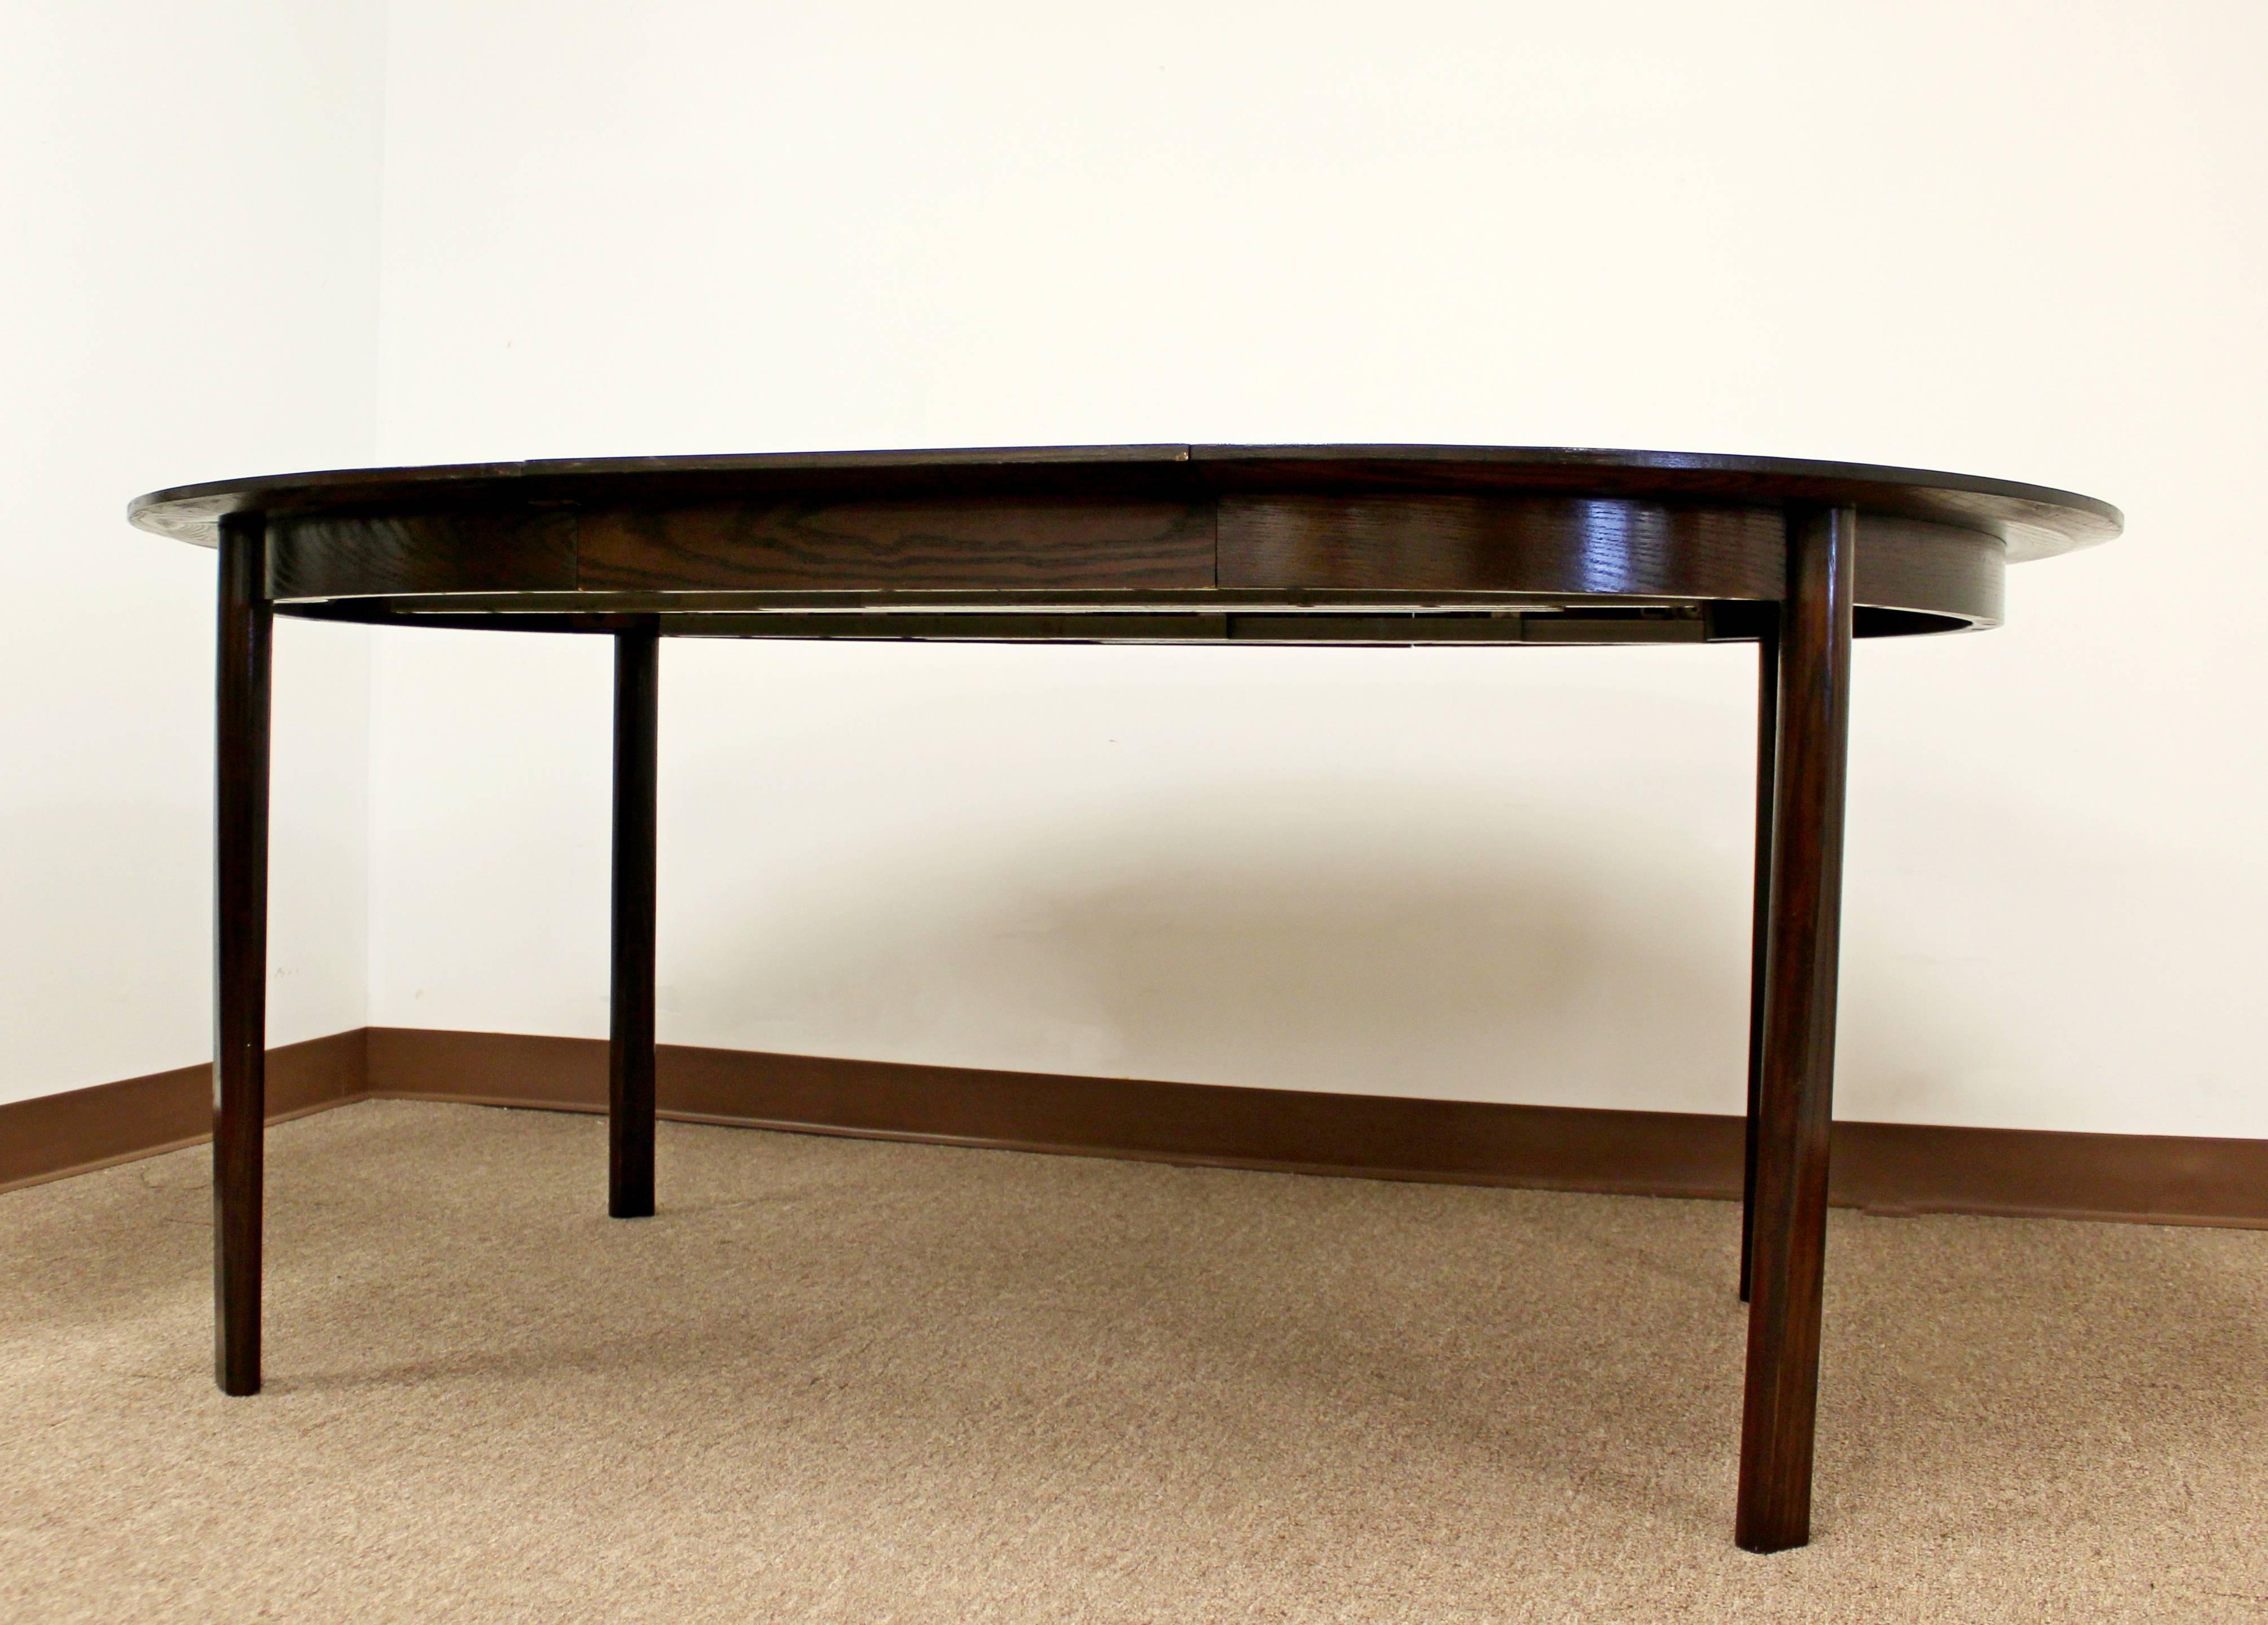 American Mid-Century Modern Mahogany Oval Extendable Dining Table and Leafs by Dunbar